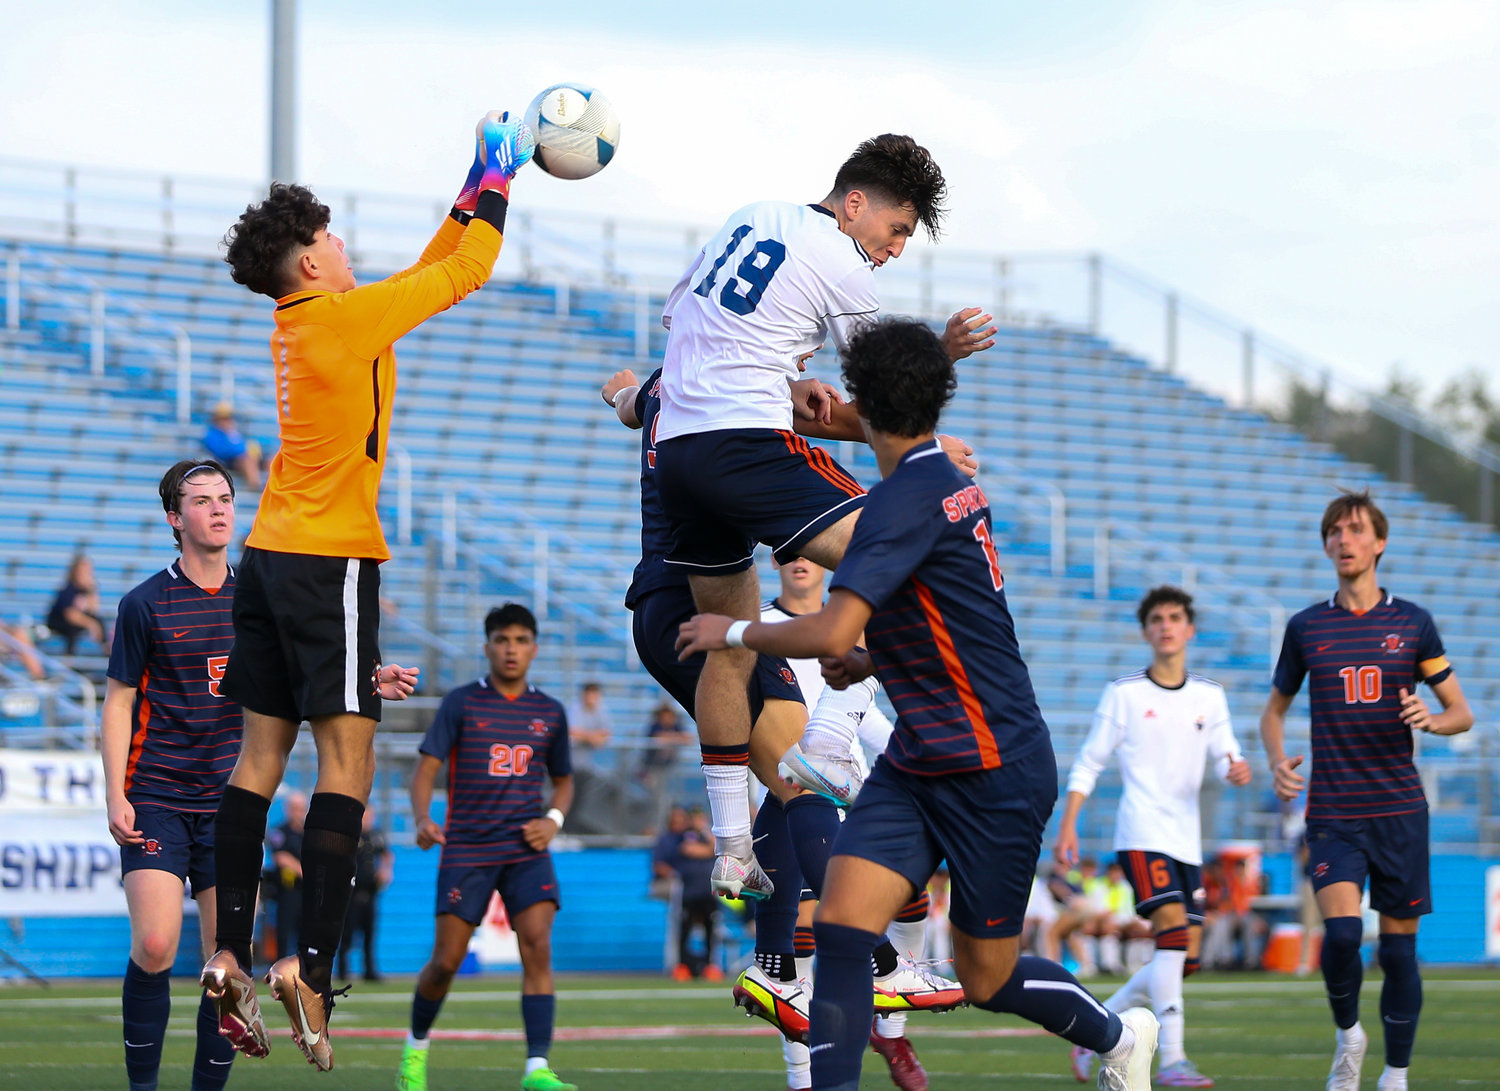 Seven Lakes goalkeeper Ben Aviles Vera (1) punches the ball away during the Class 6A boys state semifinal soccer game between Seven Lakes and Sachse on April 14, 2023 in Georgetown.